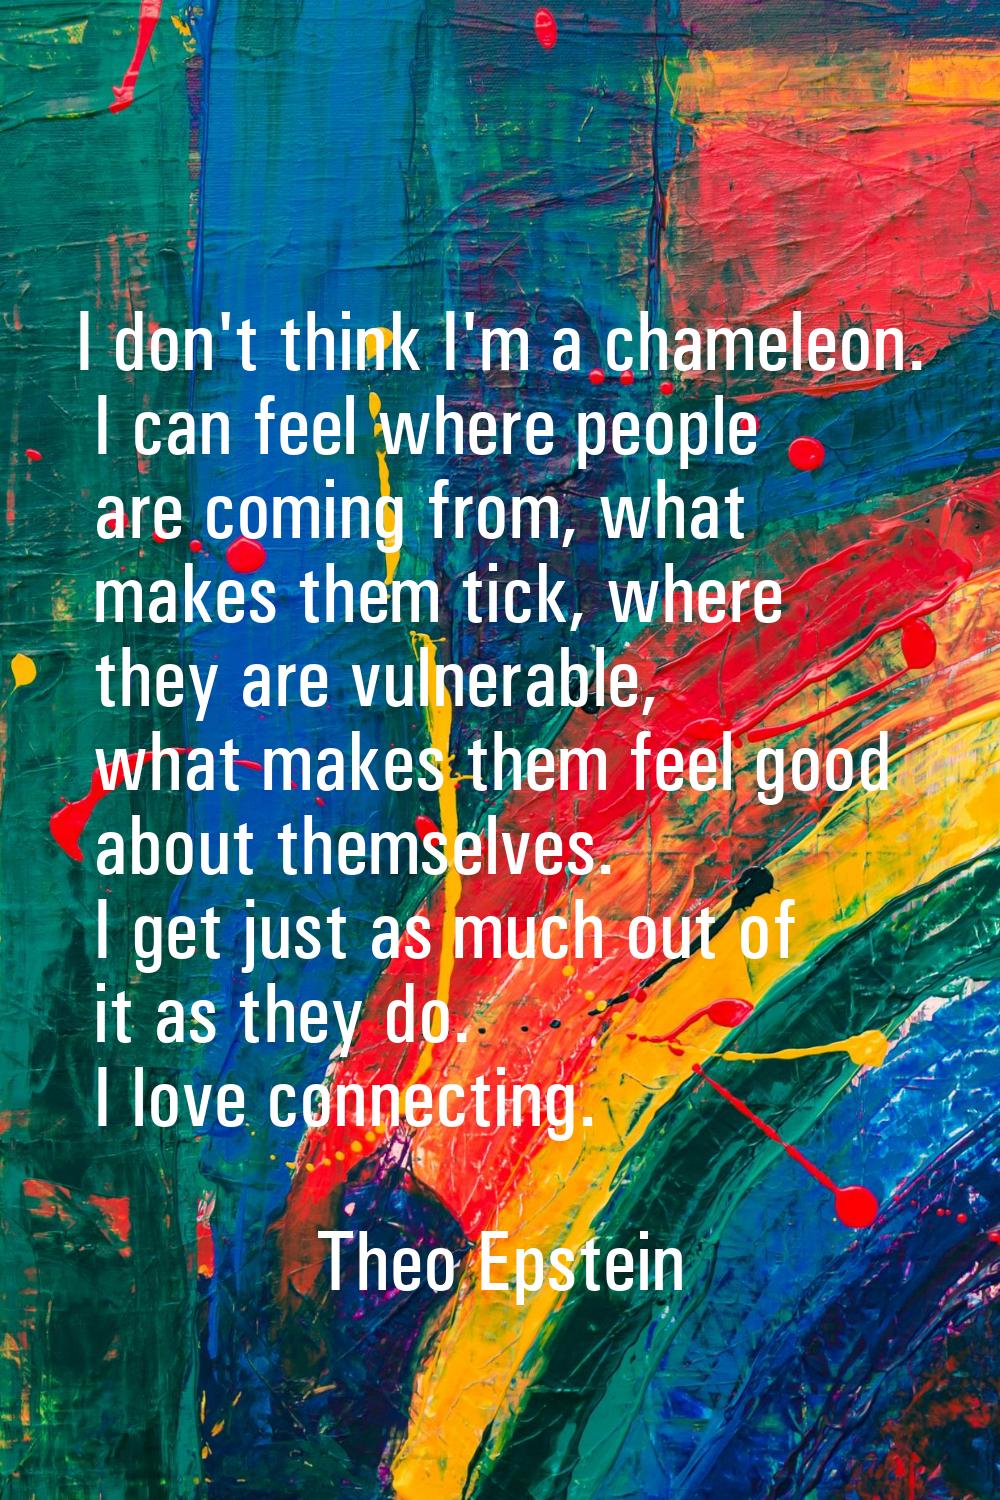 I don't think I'm a chameleon. I can feel where people are coming from, what makes them tick, where